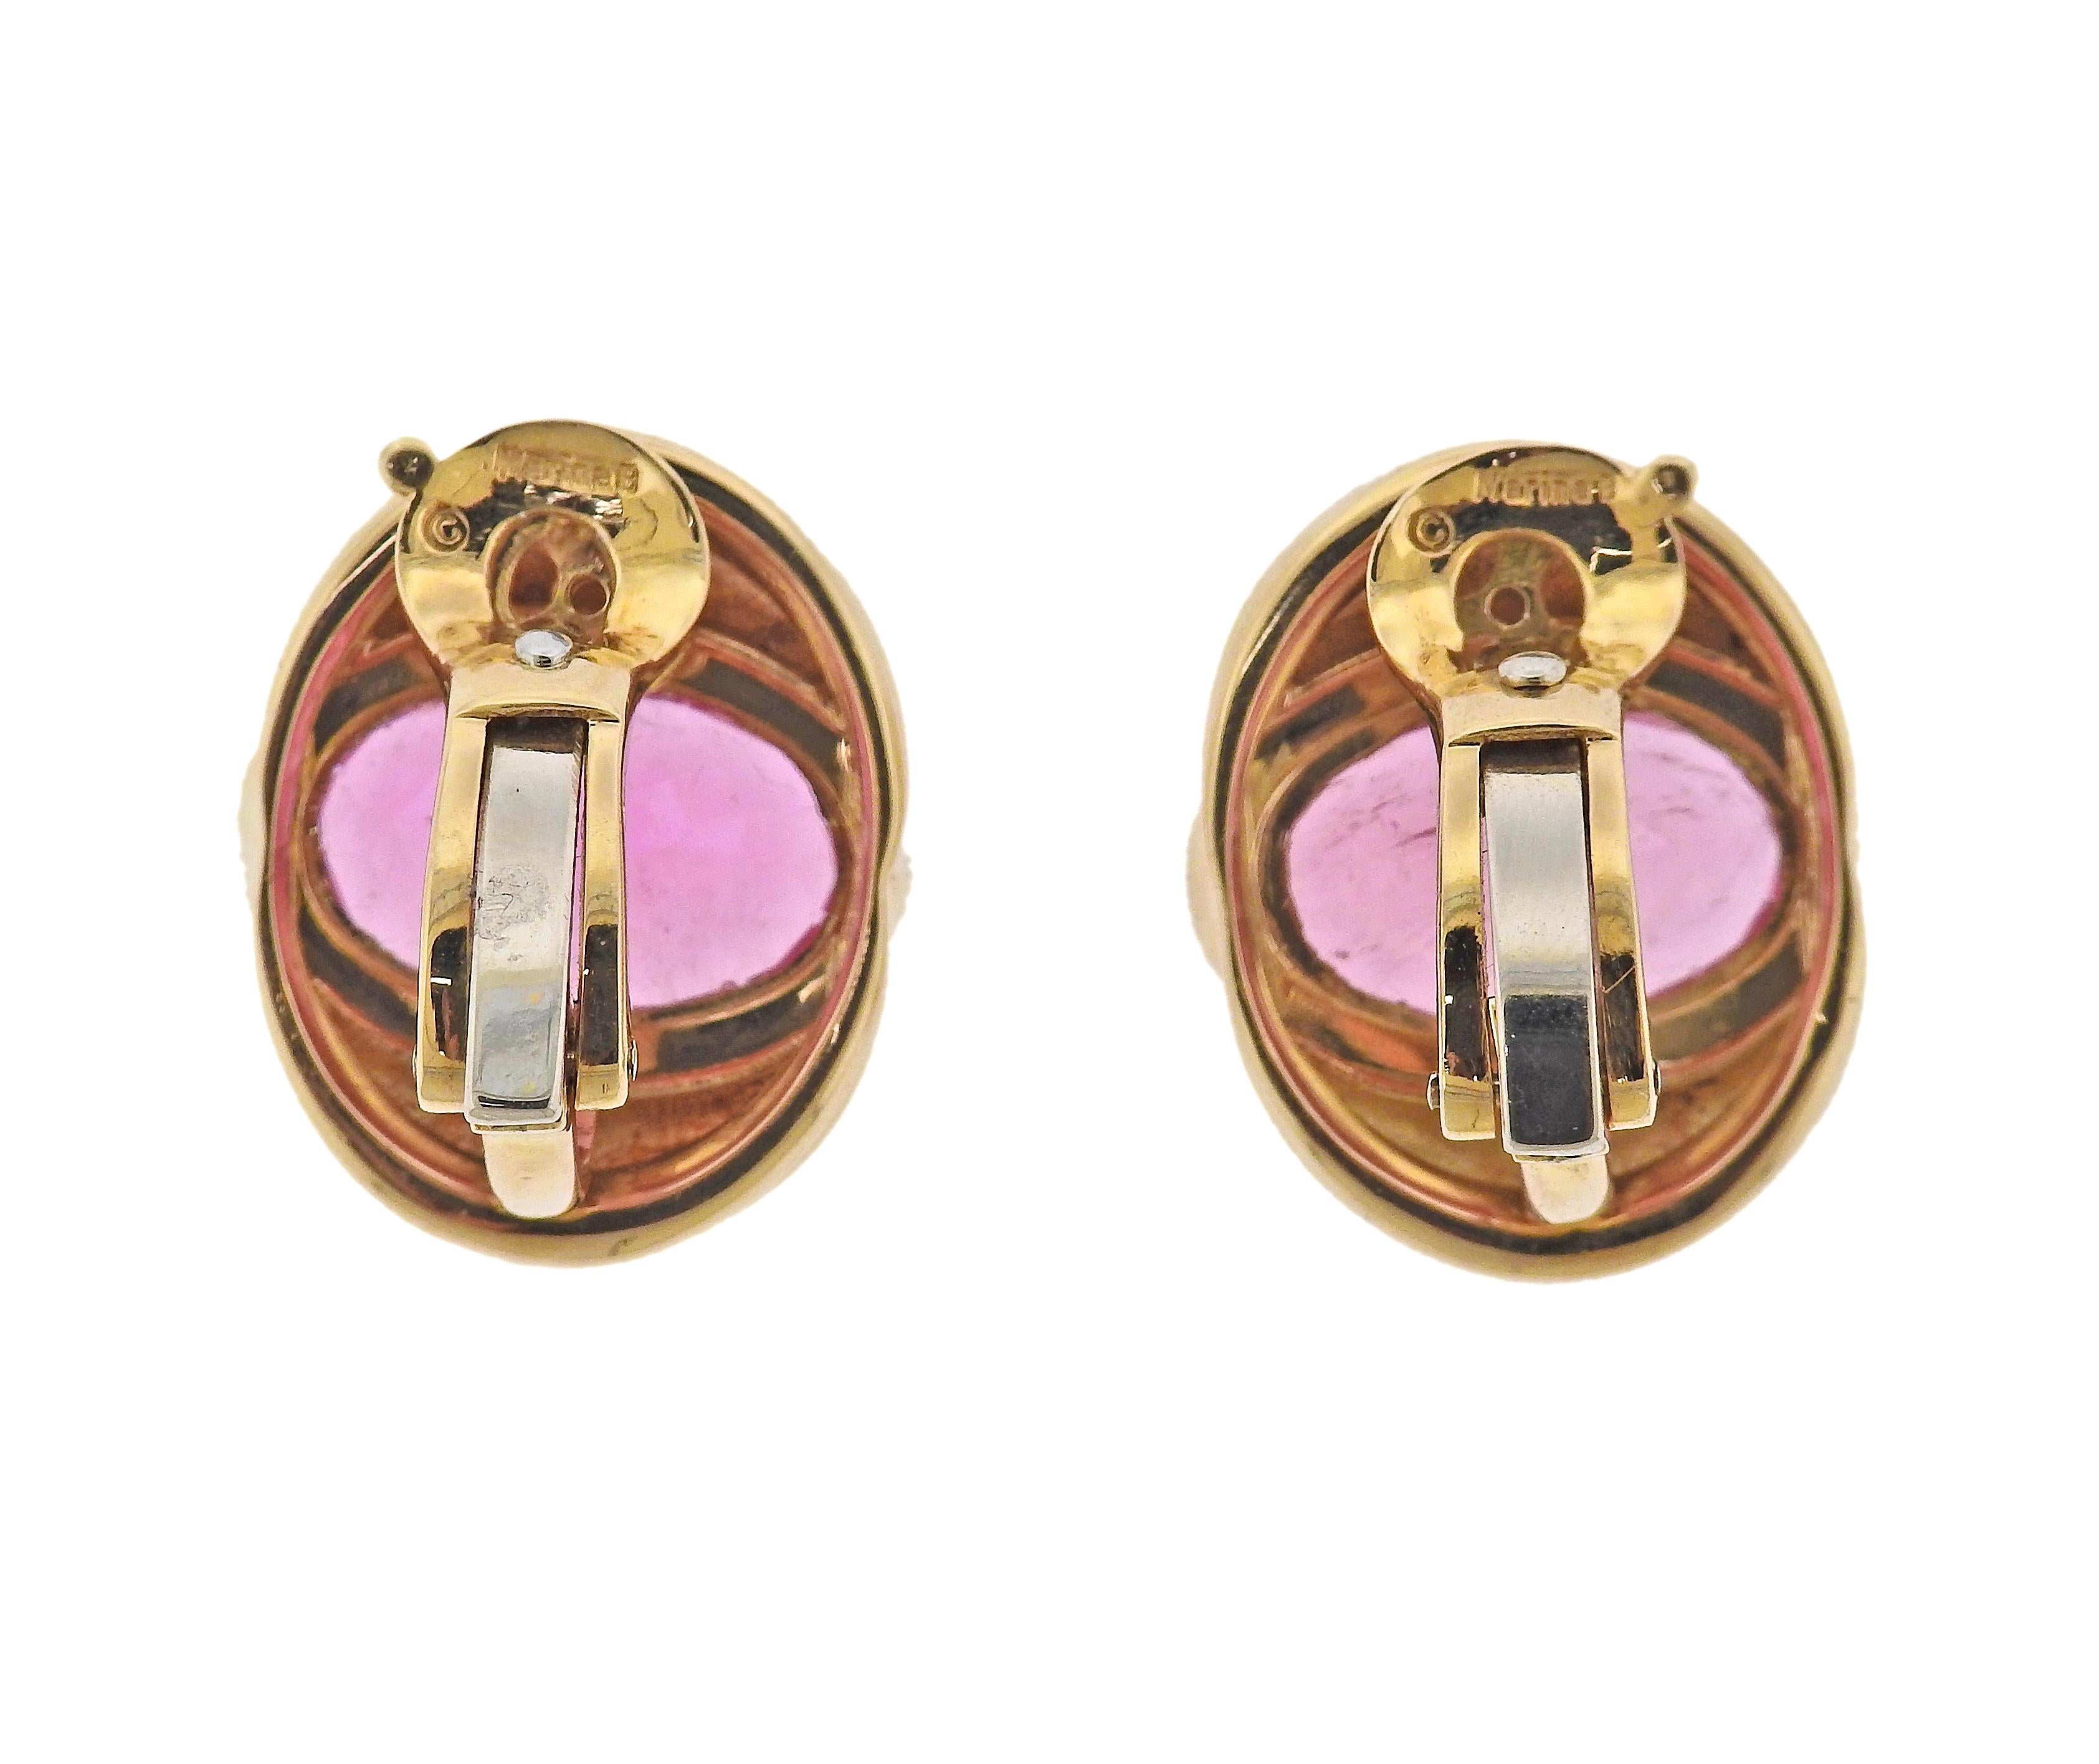 Pair of 18k gold Marina B earrings, with oval pink tourmalines in the center, approx. 6ct each. Earrings measure19mm x 24mm. Marked: Marina B, MB, C2638, 750. Weight - 25.4 grams.